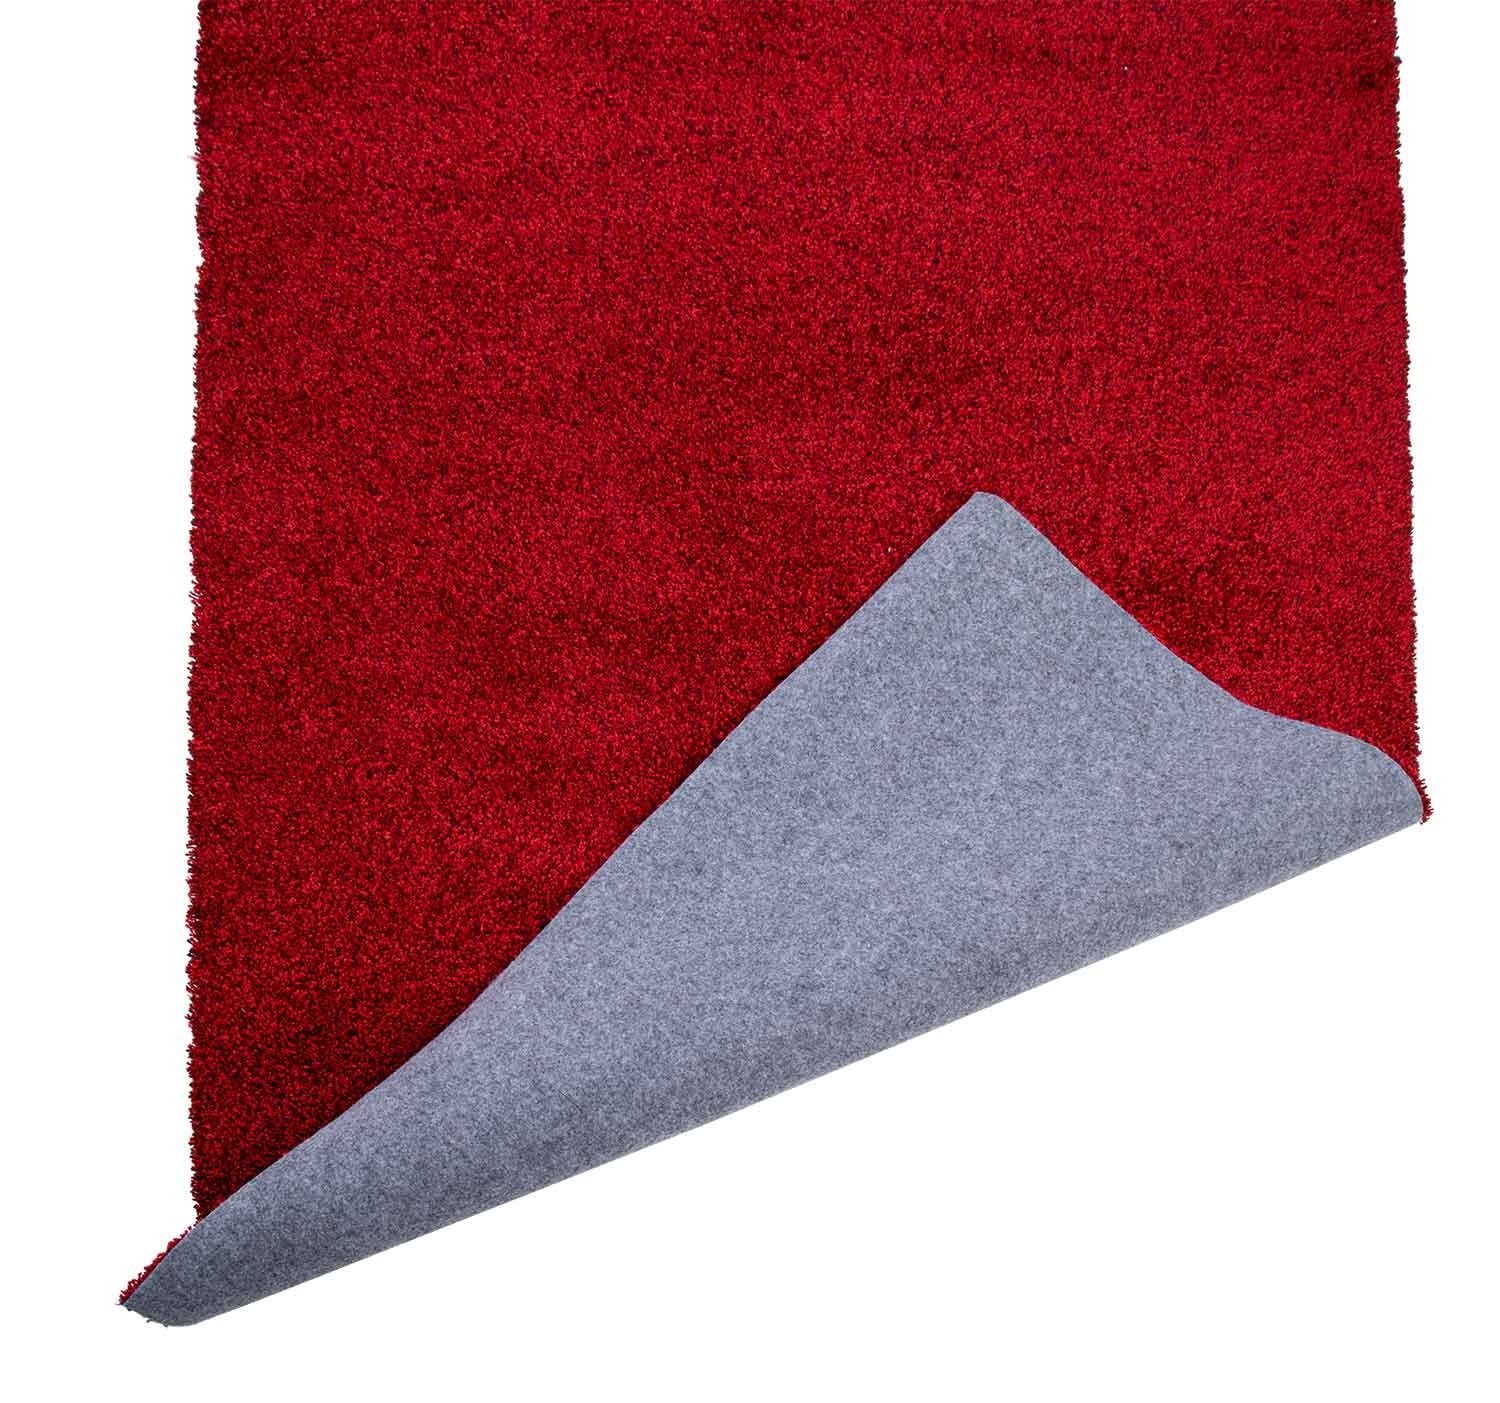 cm, COSY, 22 Rot, DELIGHT 230 x rechteckig, Rugs, 160 mm Höhe: Teppich Polyester, Balta